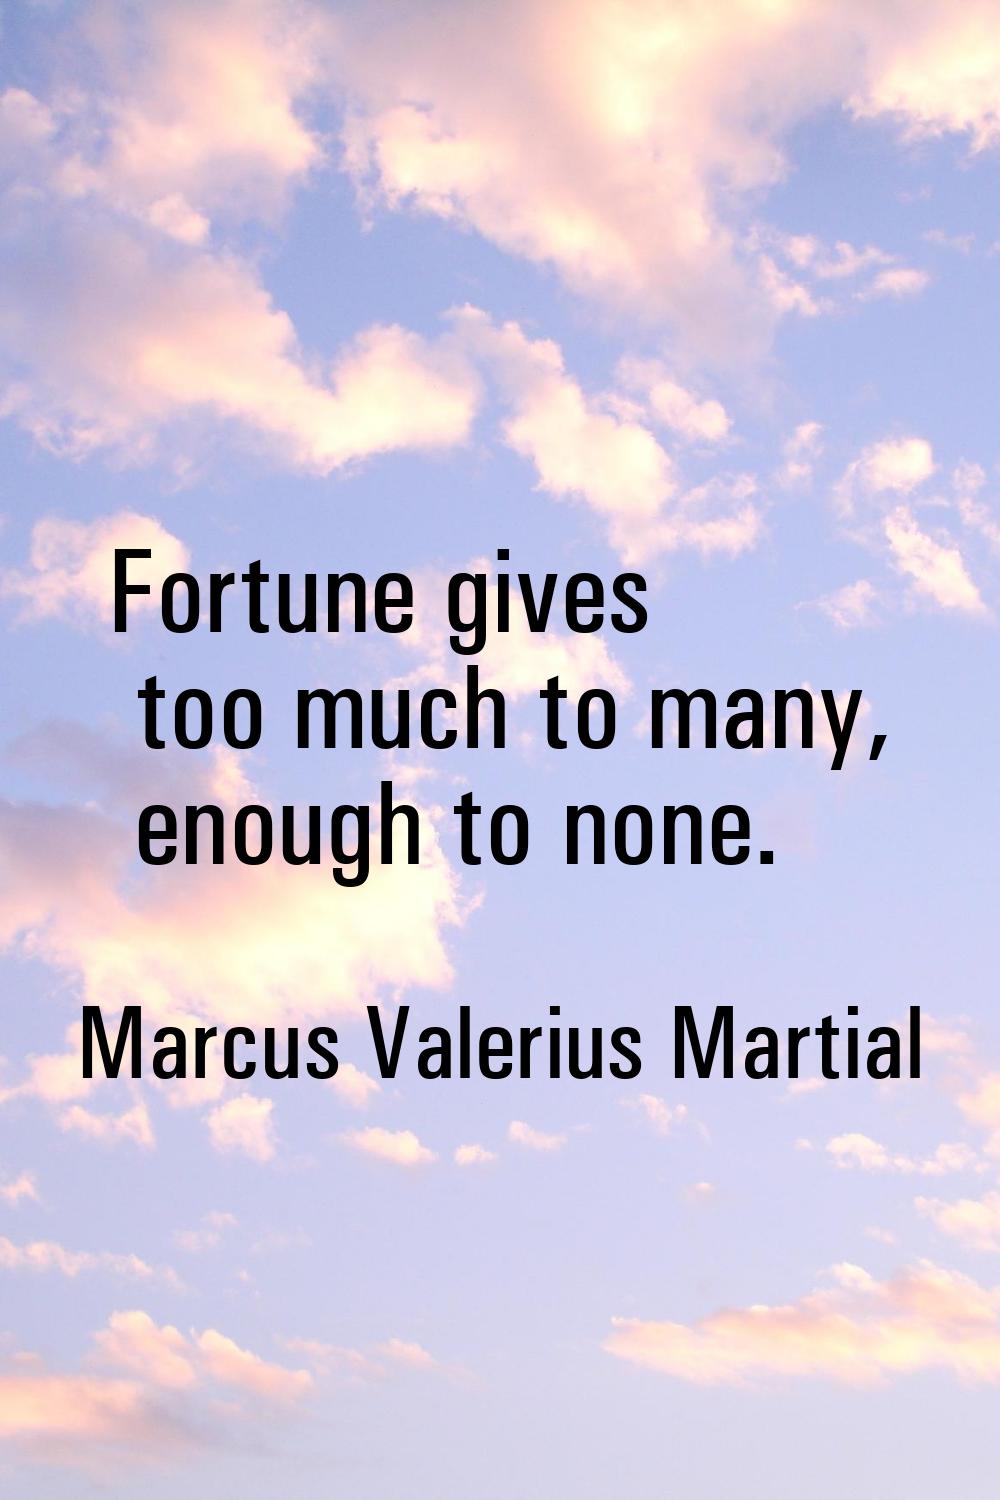 Fortune gives too much to many, enough to none.